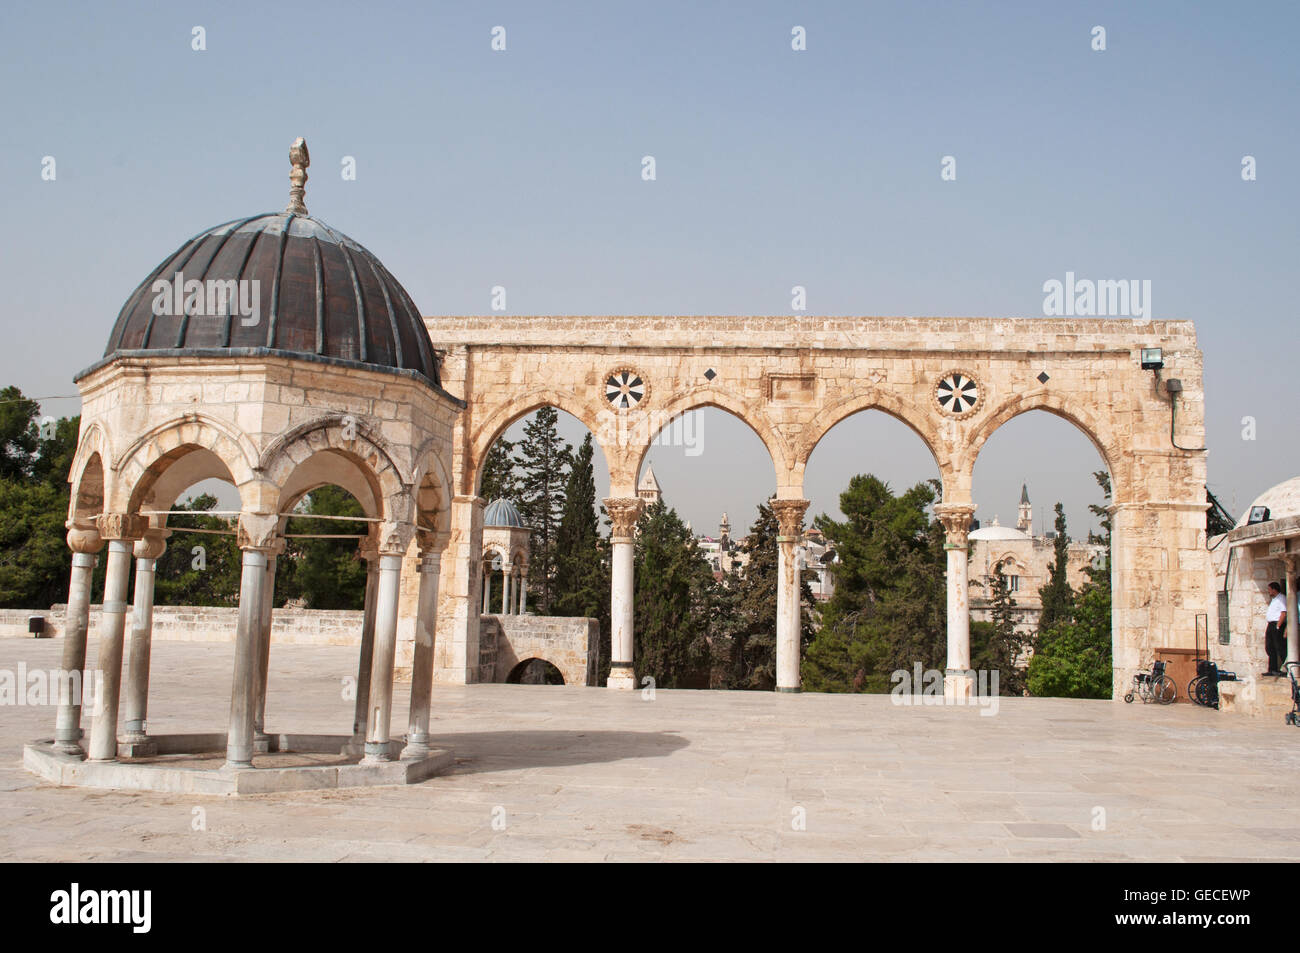 Jerusalem: the arches and the Dome of the Winds, a small 16th century dome on the Temple Mount, known to Muslims as the Haram esh-Sharif Stock Photo